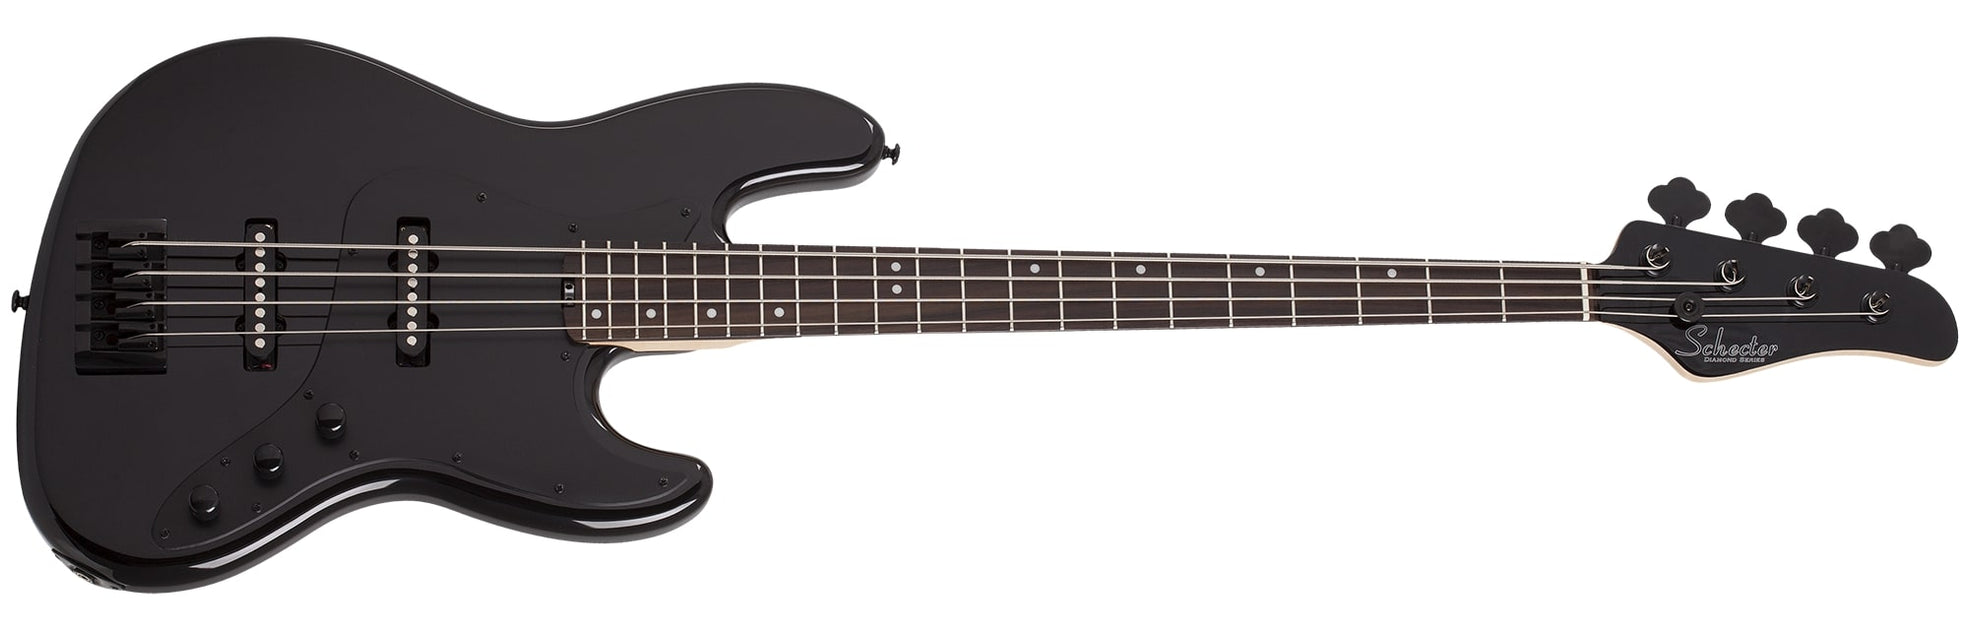 Schecter 4-string Electric Bass with Alder Body, Maple Neck 